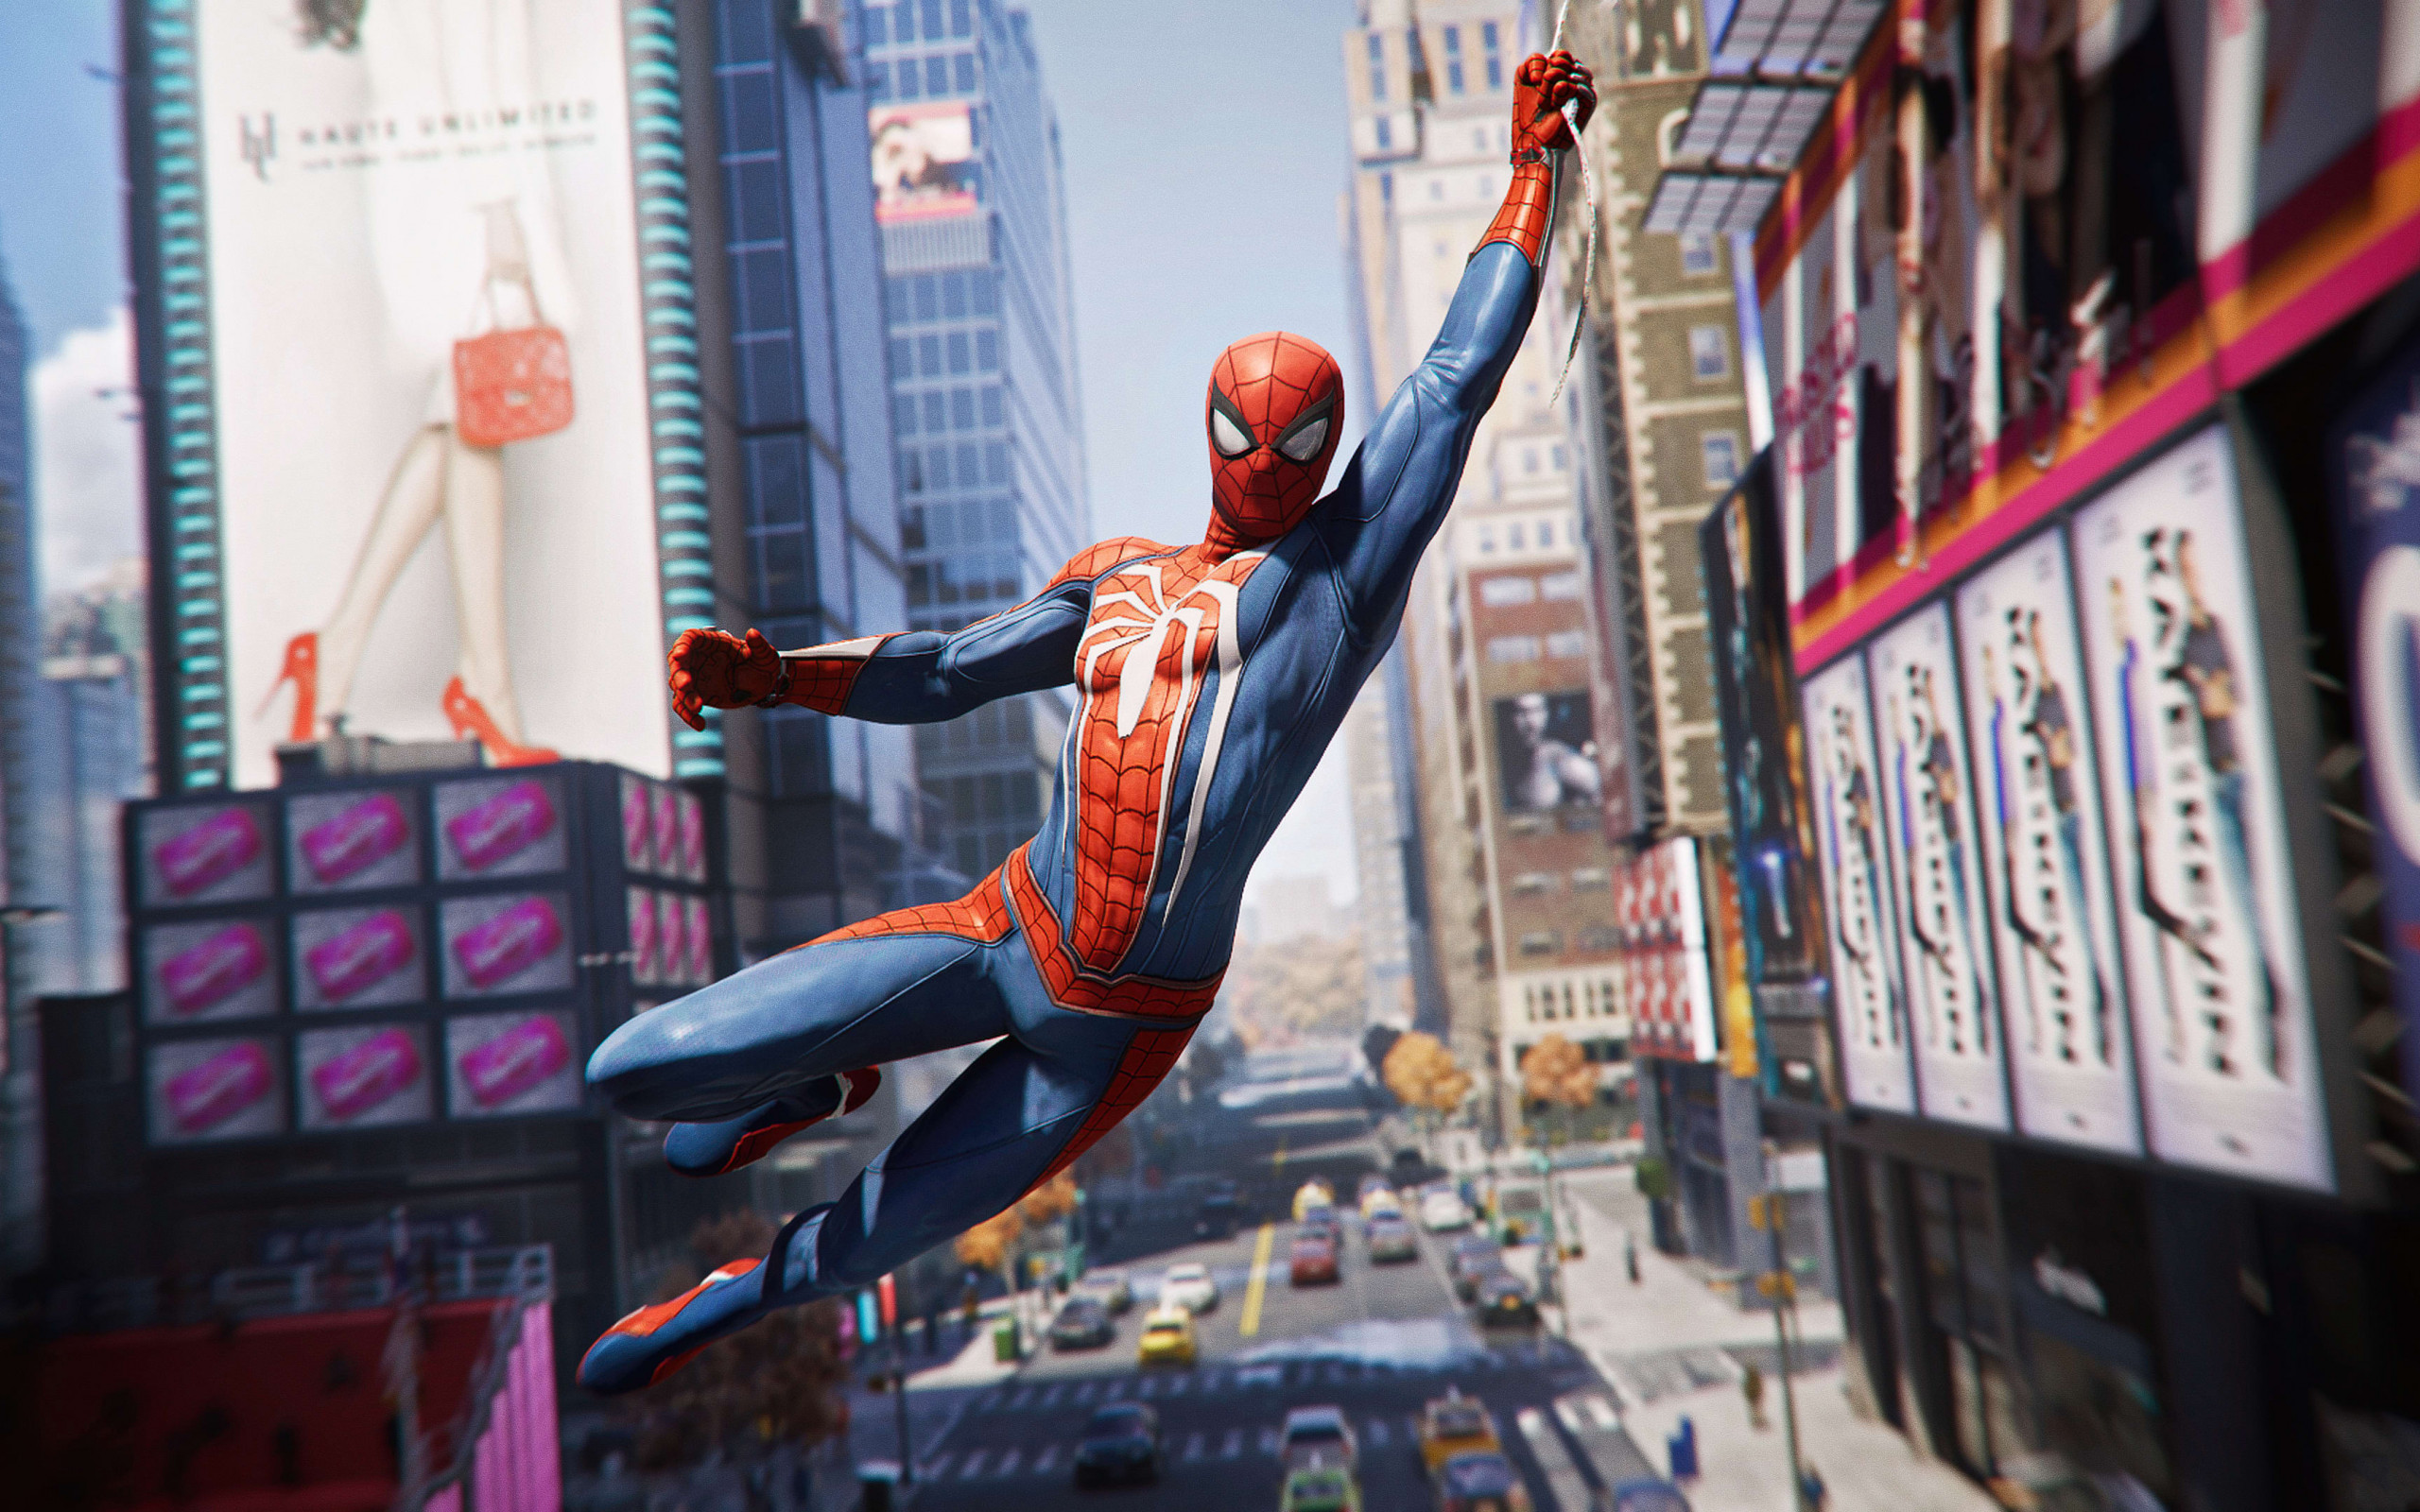 Spider Man from the video game wallpaper 2560x1600